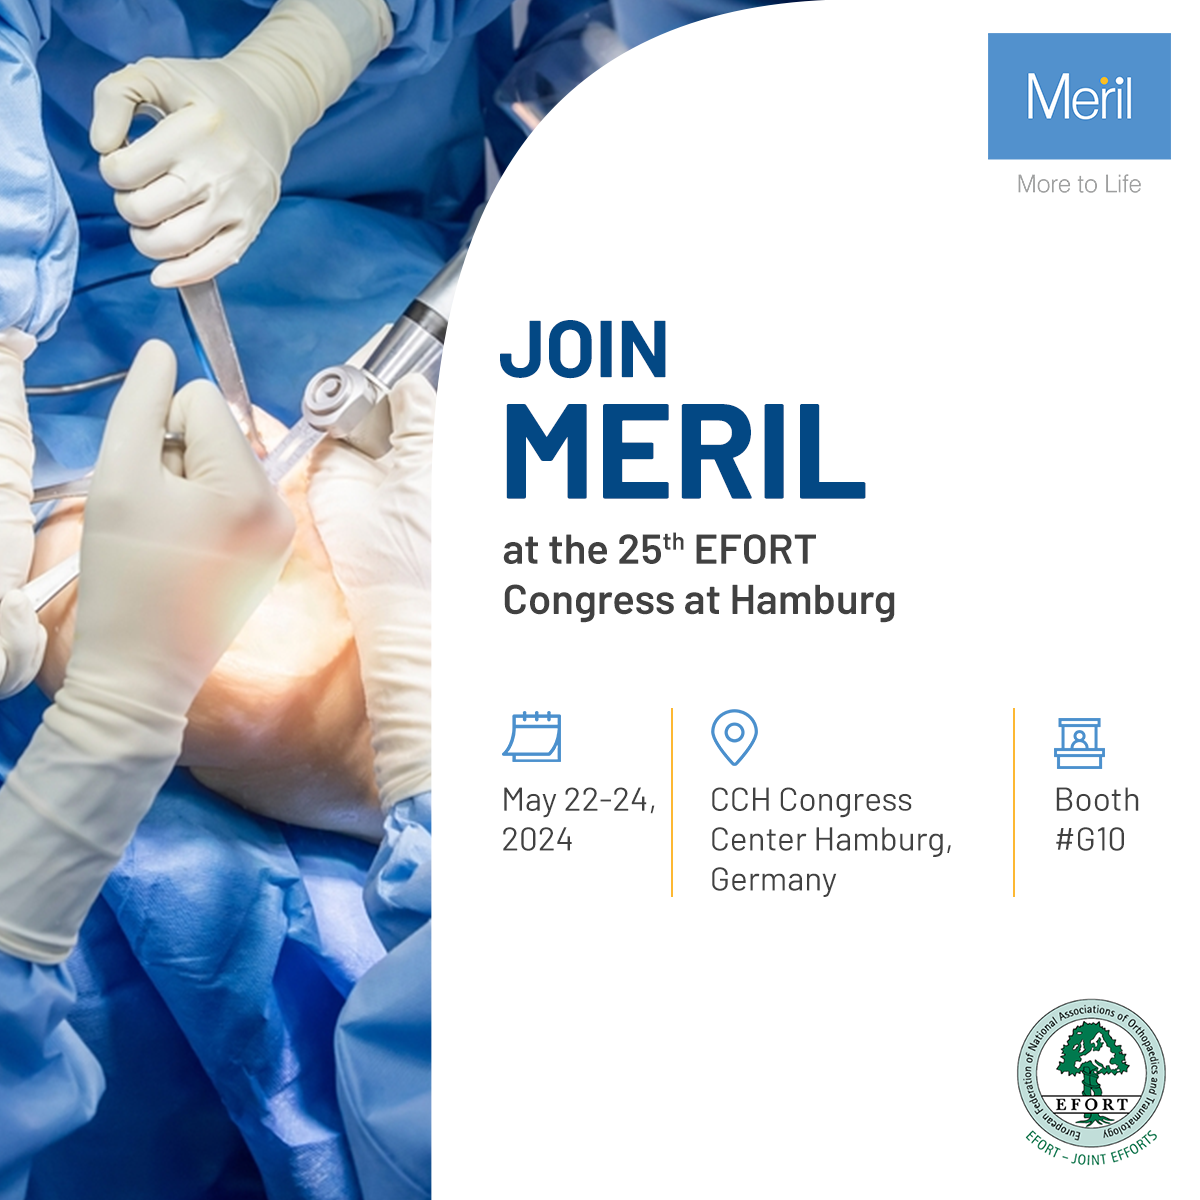 Meet Meril at the 25th EFORT Congress! Save the dates!